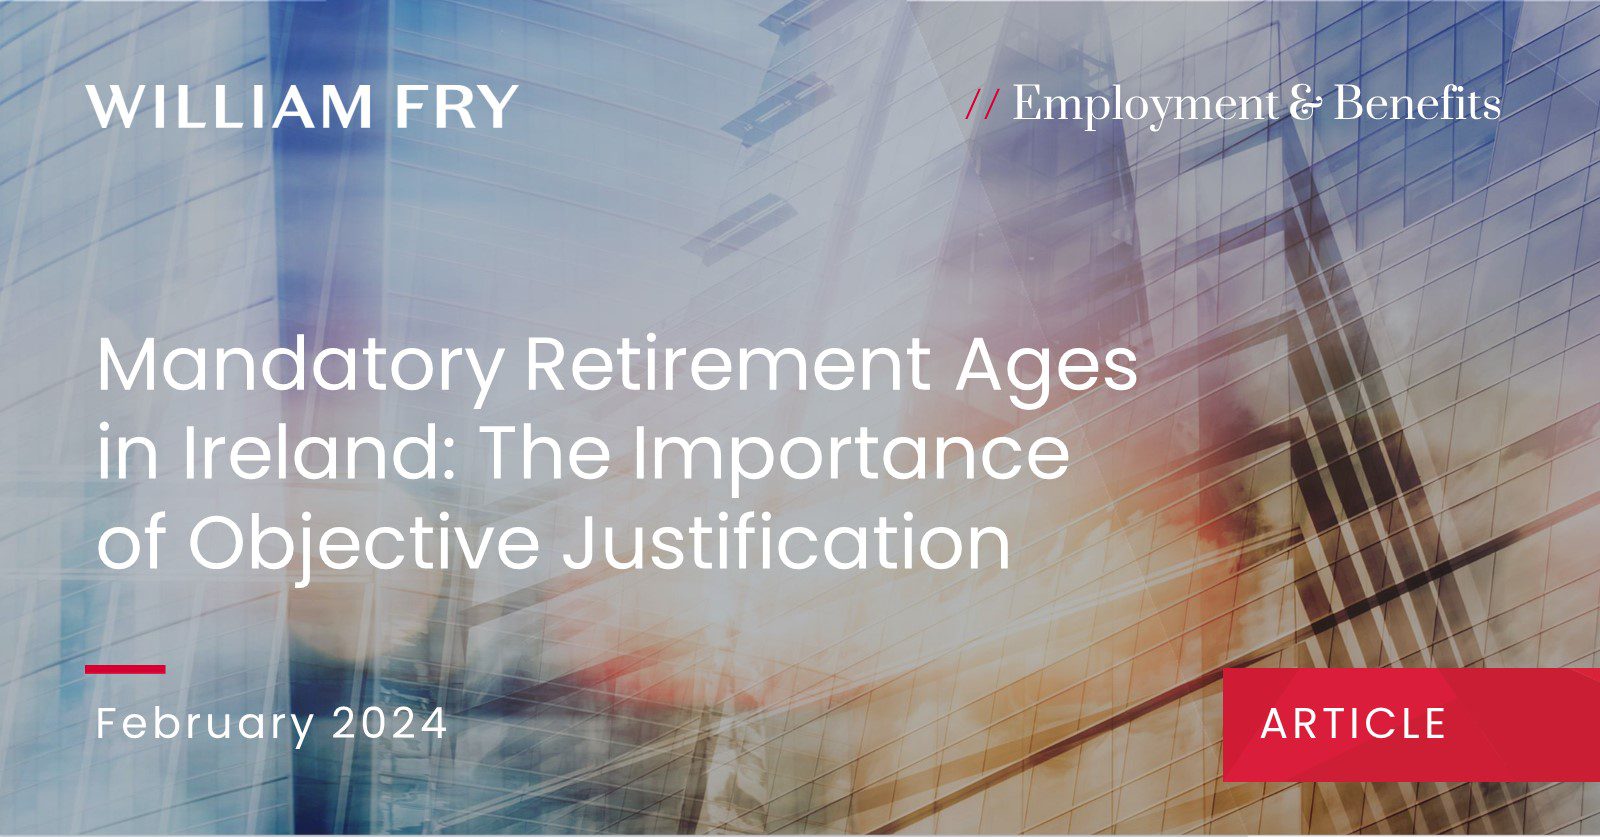 Mandatory Retirement Ages in Ireland: The Importance of Objective Justification